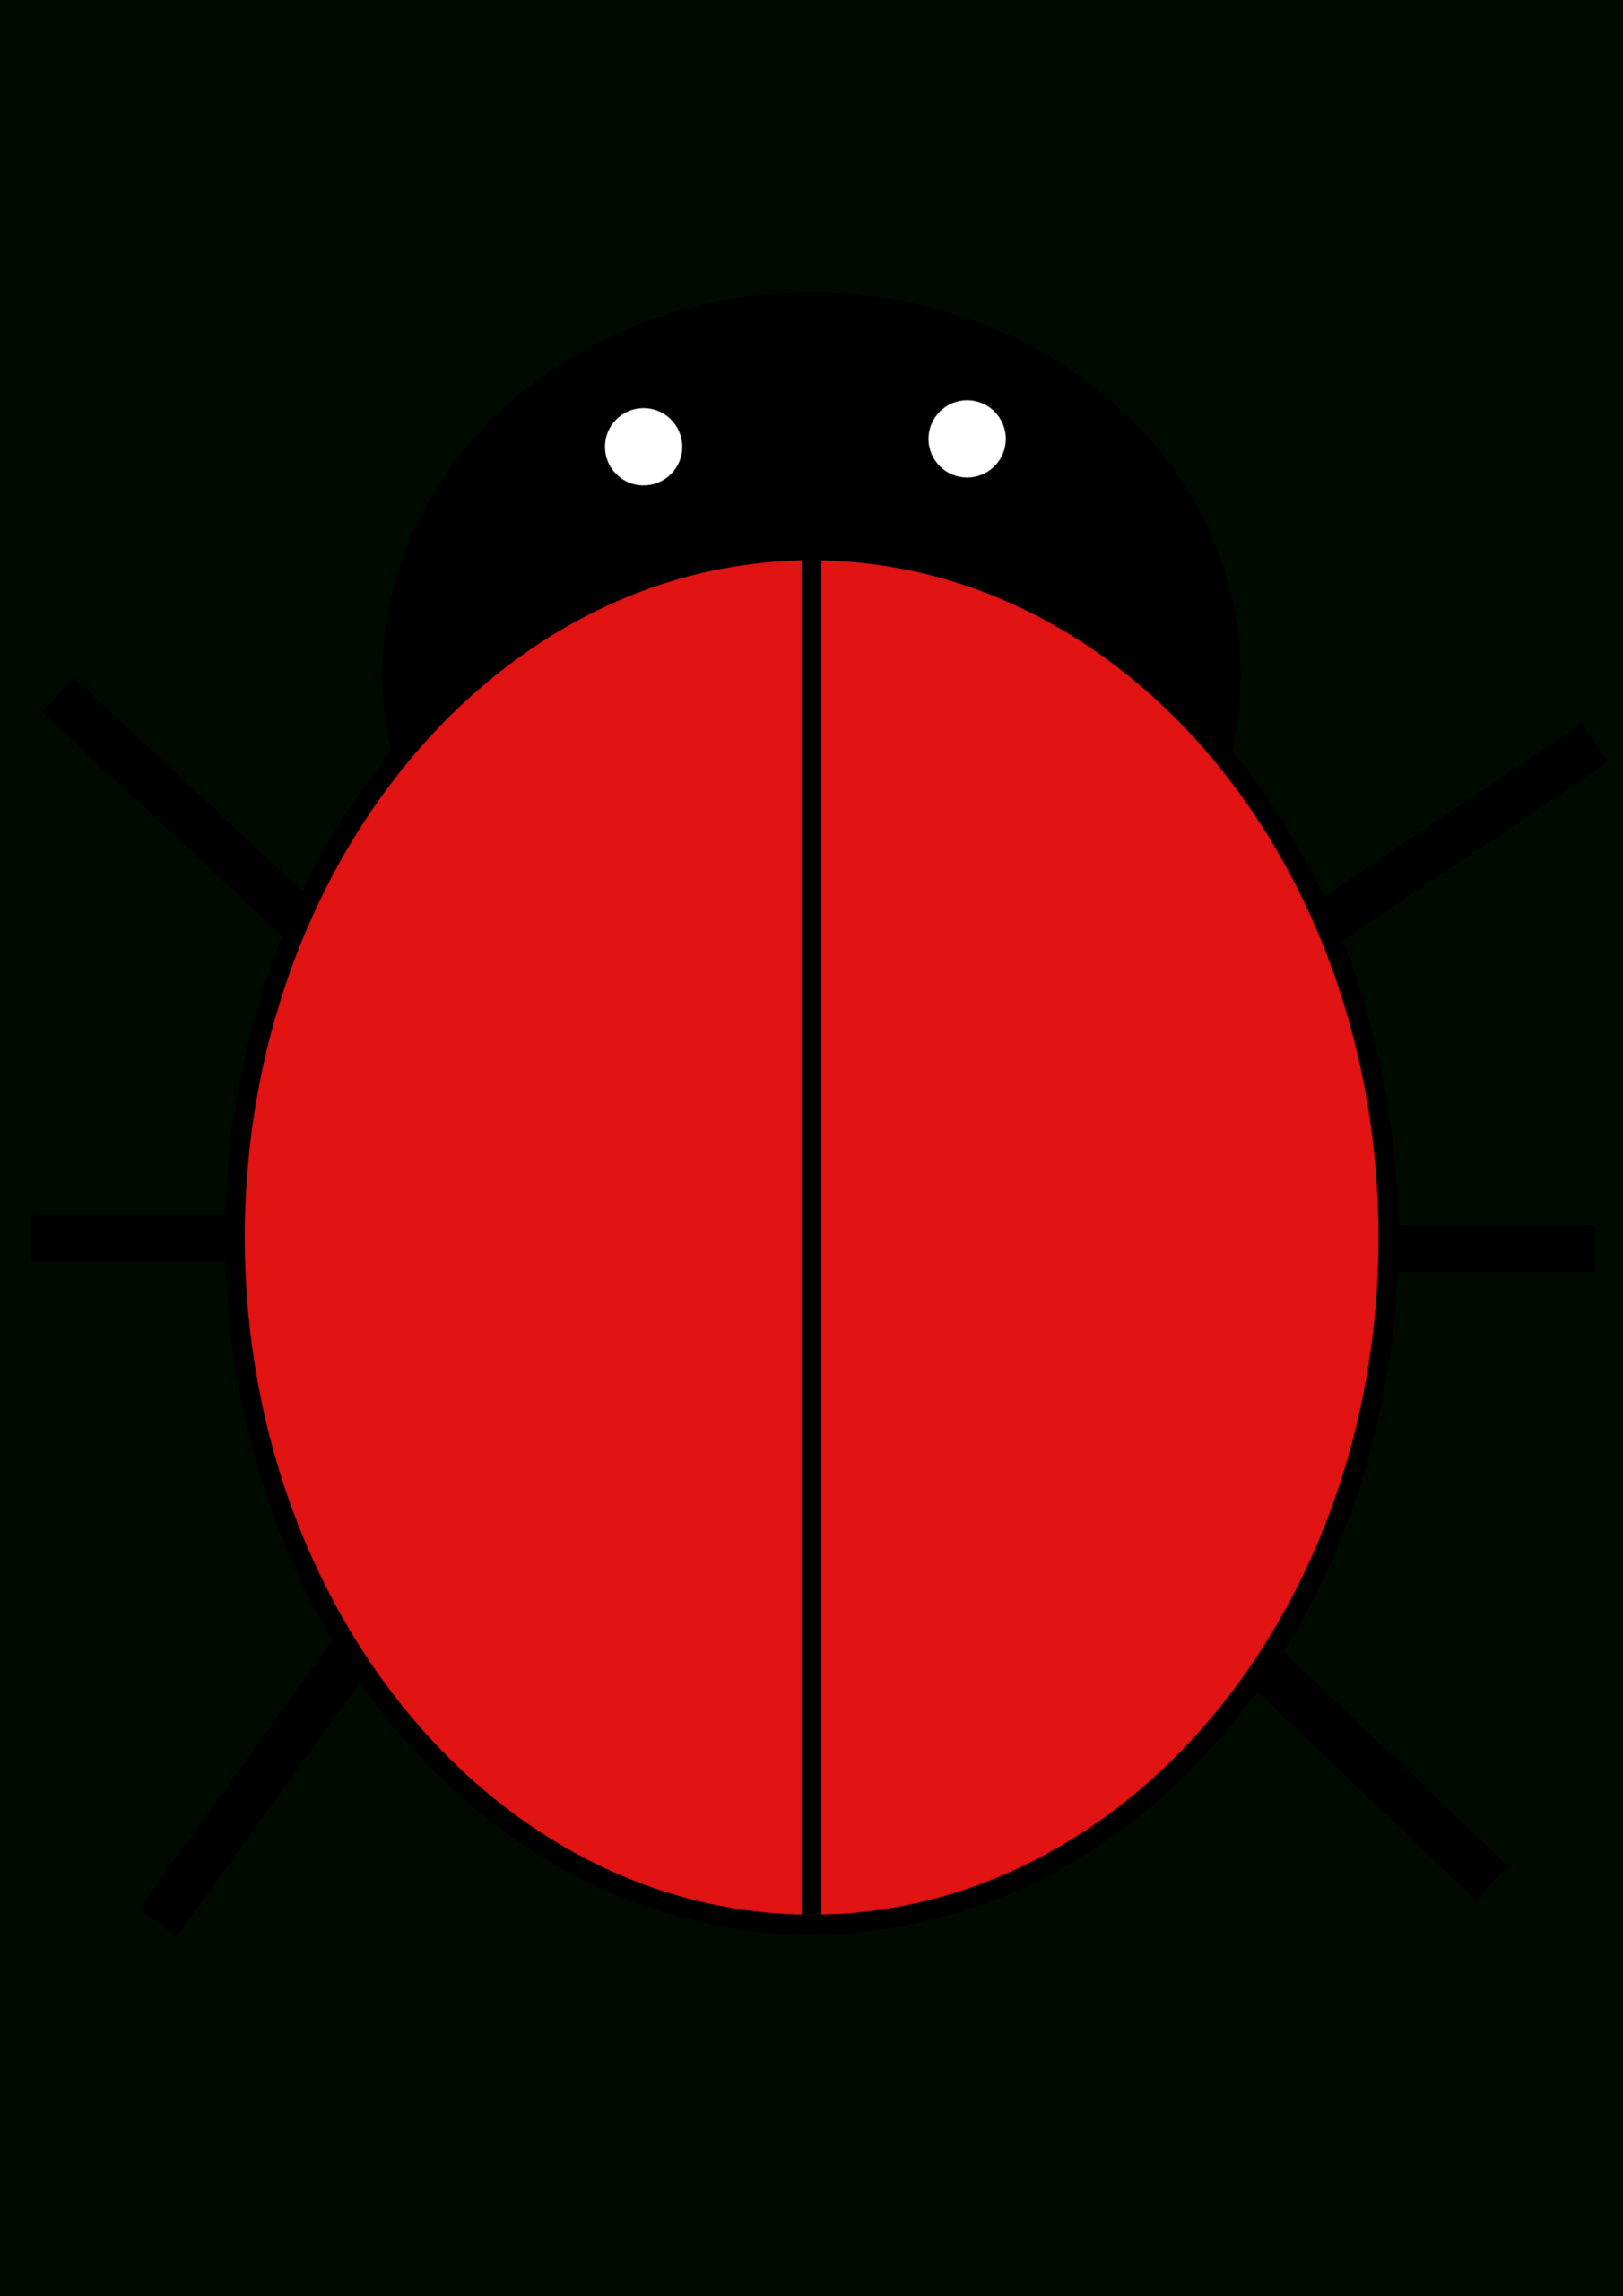 Ladybird | Free Images At Clker – Vector Clip Art Online With Blank Ladybug Template